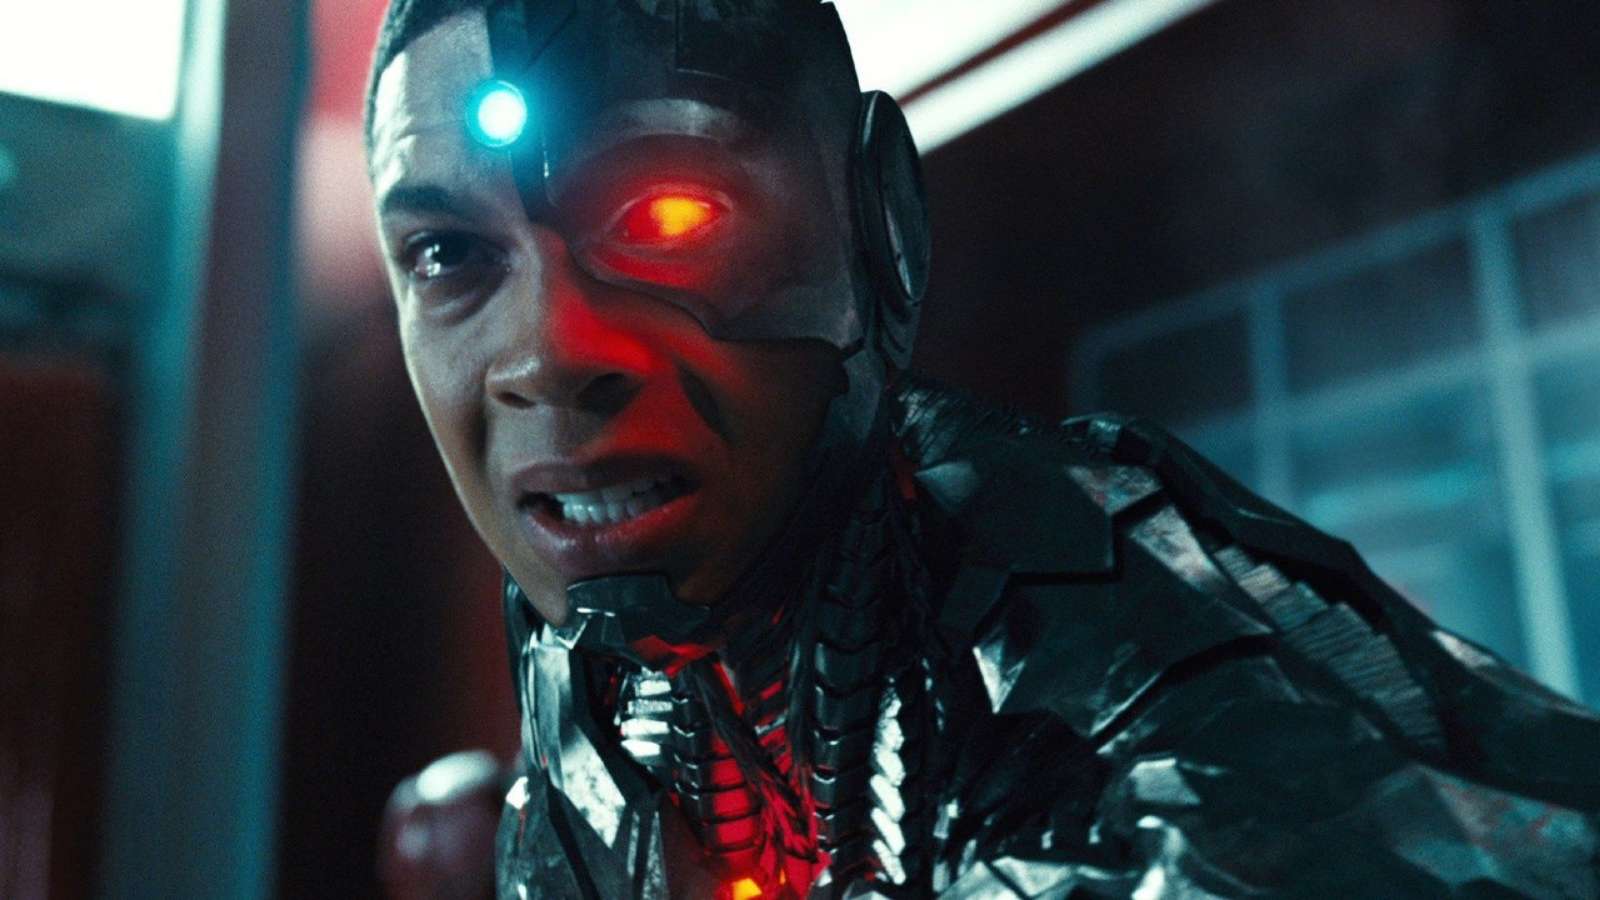 Fisher as Cyborg in the film